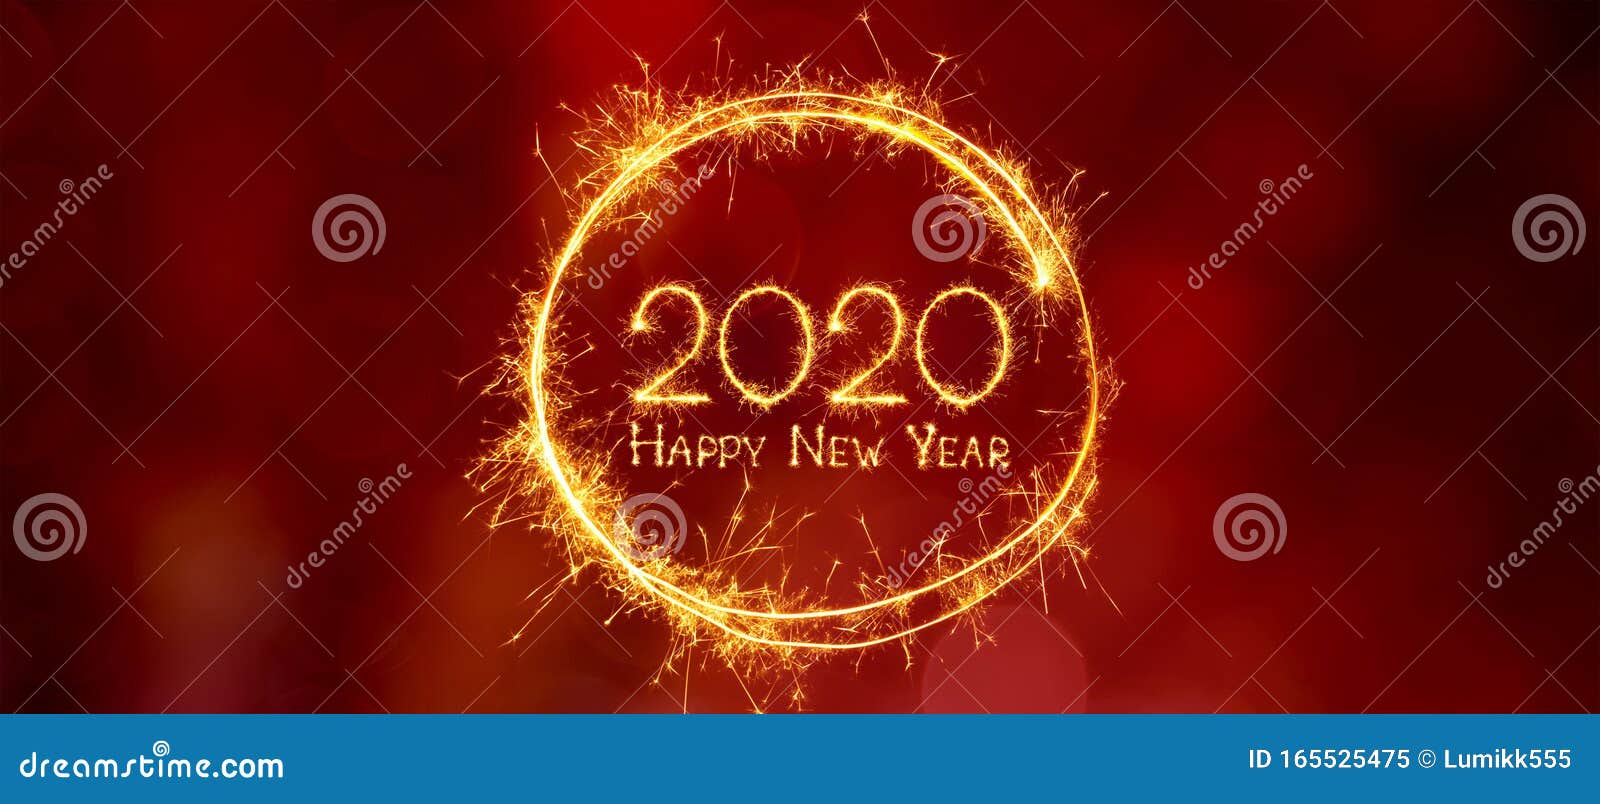 Wide Angle Greeting Card Happy New Year 2020 Stock Illustration ...